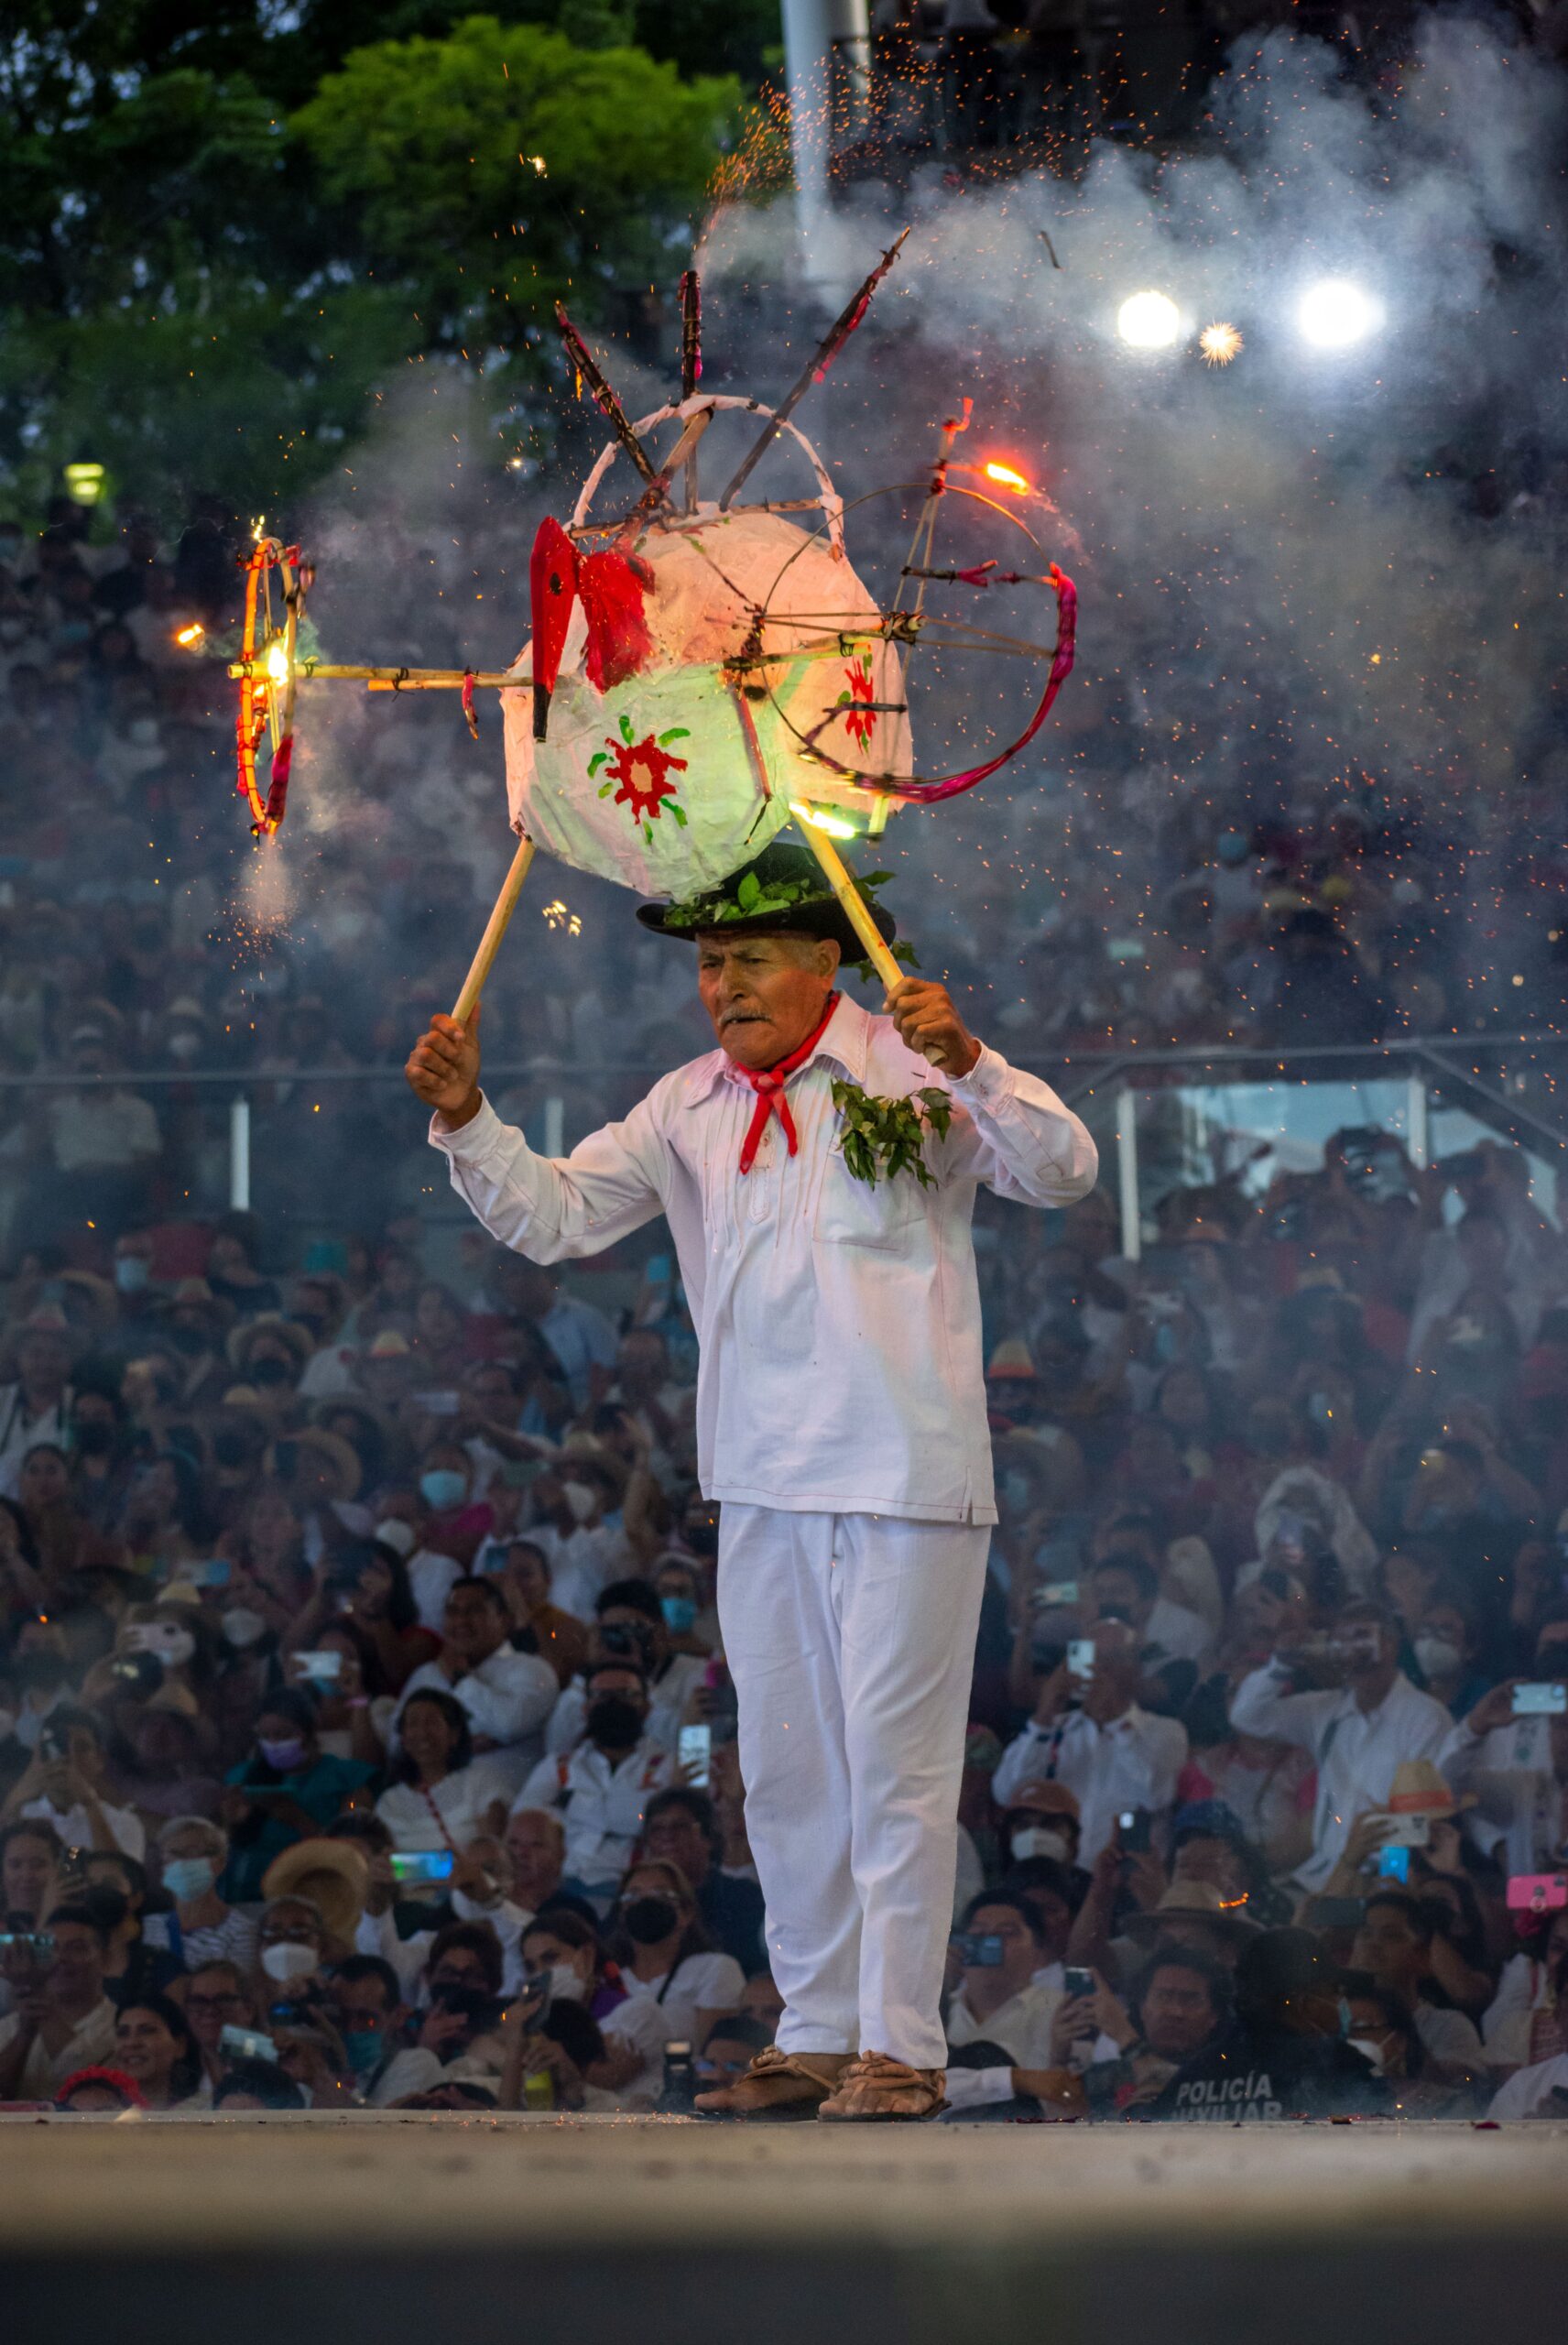 The Ultimate Guide to Strange and Unusual Ceremonies and Traditions Around the World